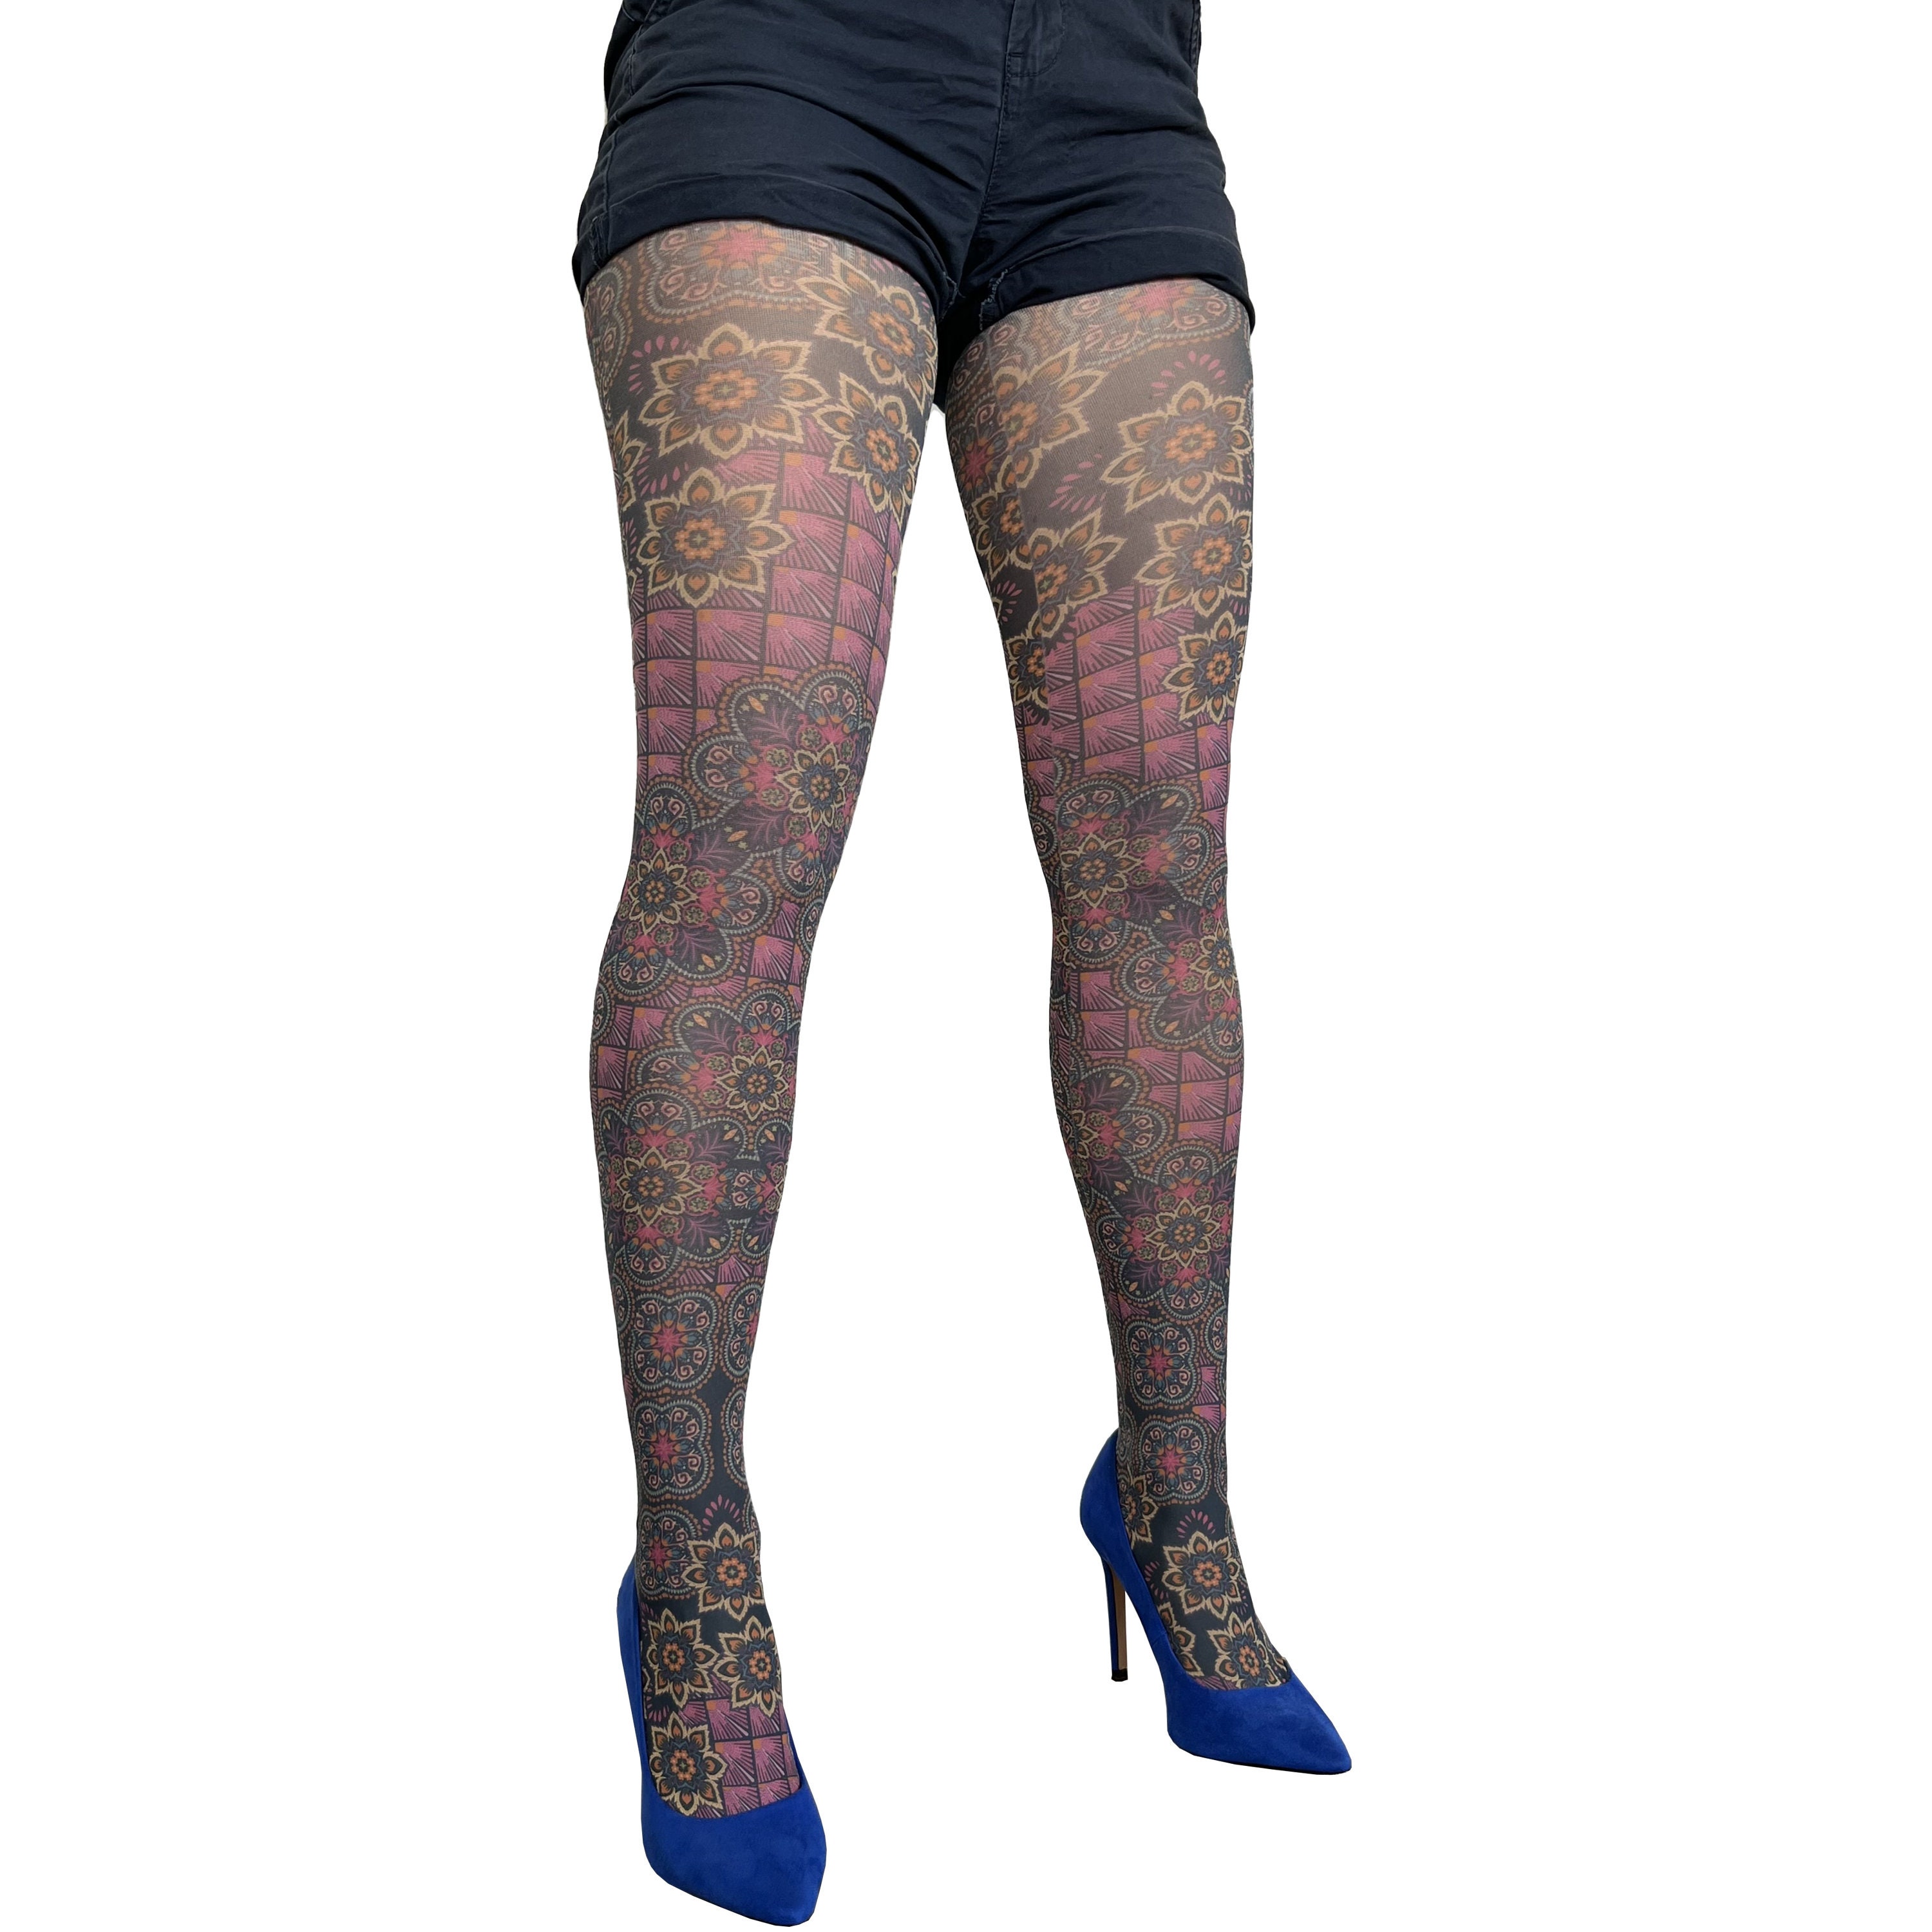 Purple Boho Chic Printed Tights Pantyhose for Women Available in